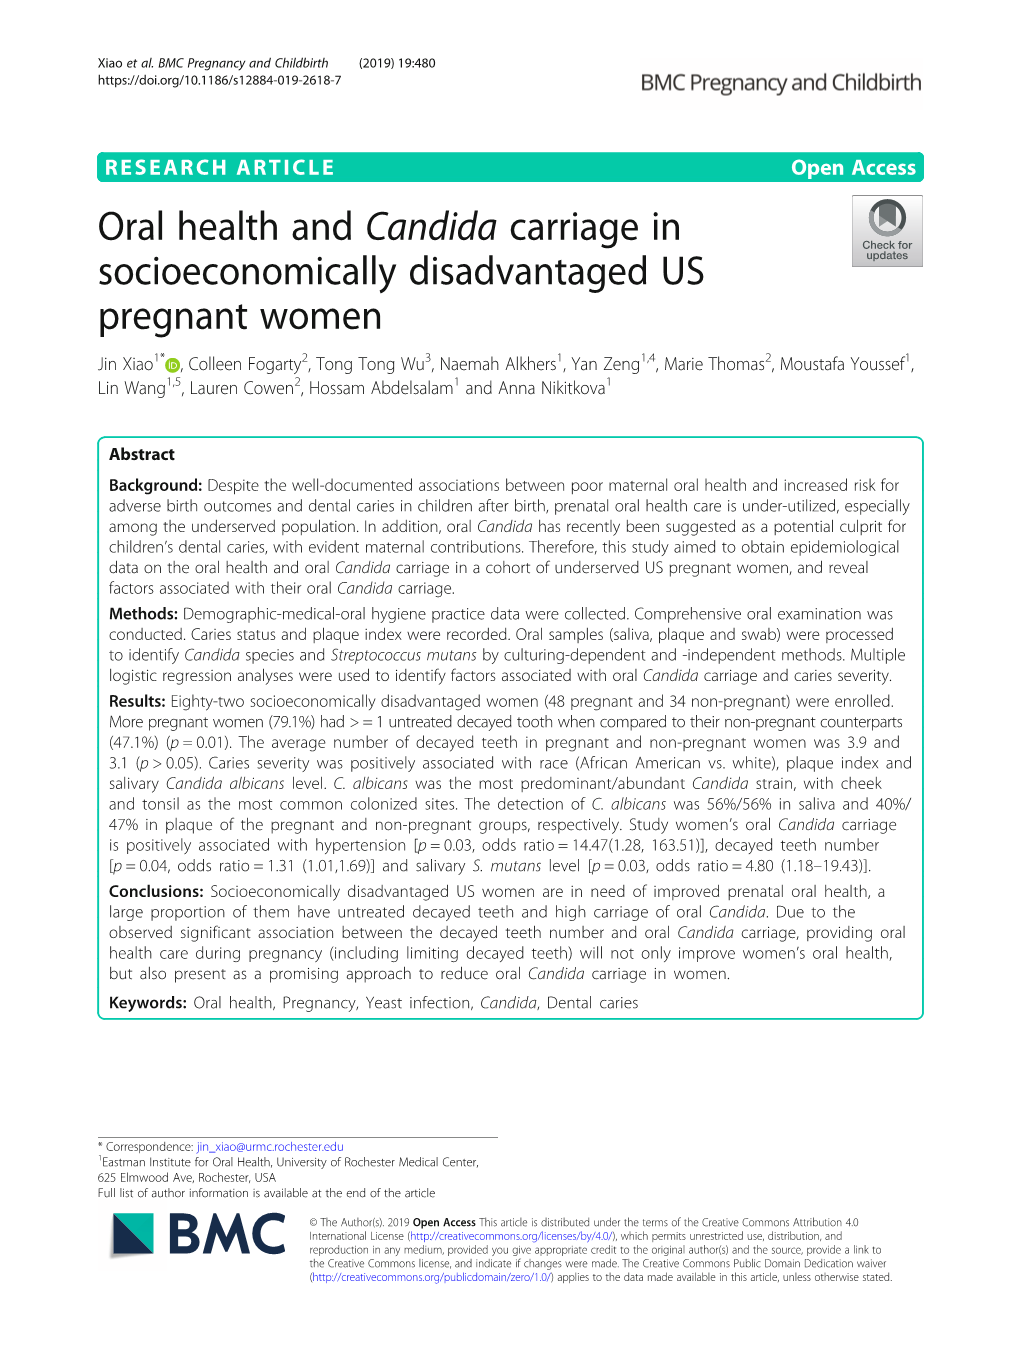 Oral Health and Candida Carriage in Socioeconomically Disadvantaged